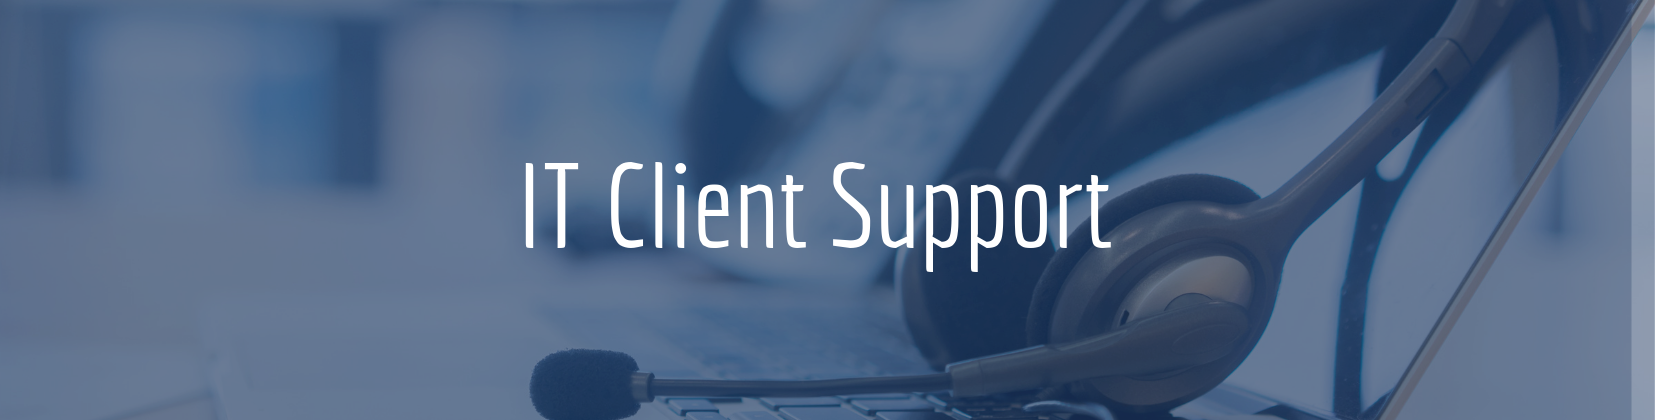 IT Client Support Banner